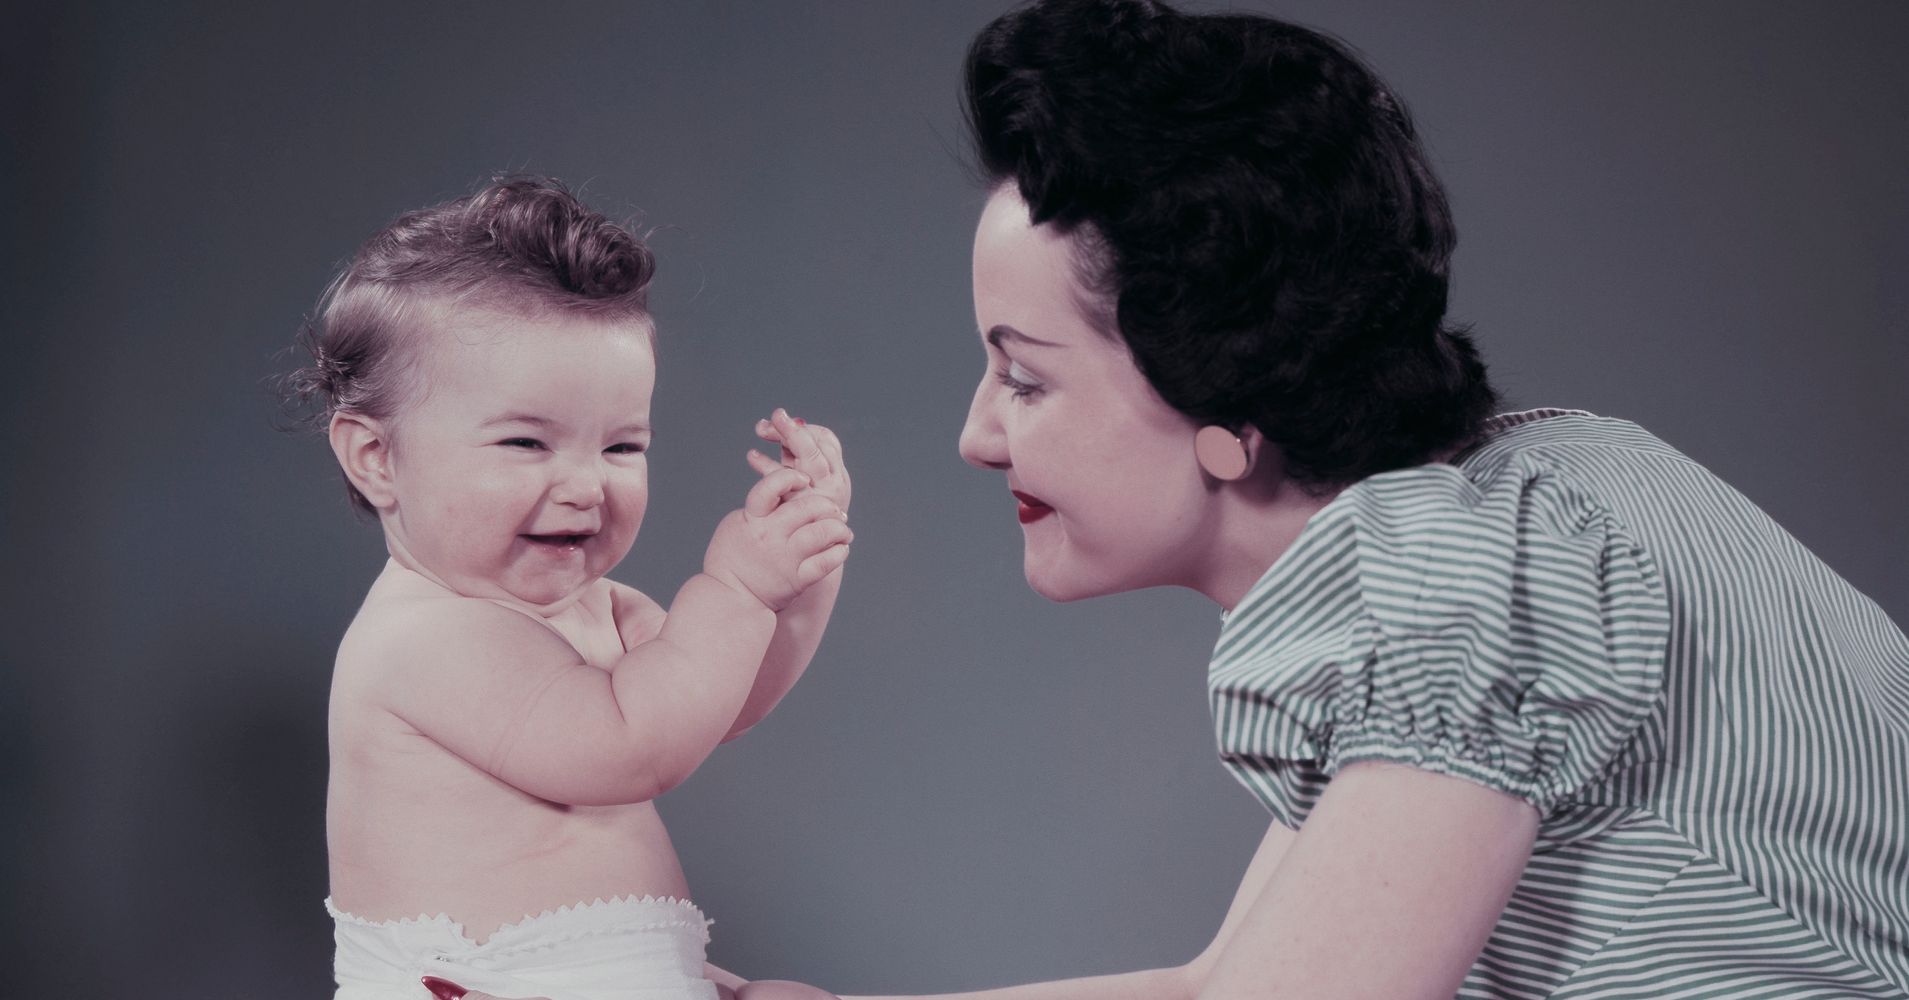 These Were The Most Popular Baby Names In The 1950s ...